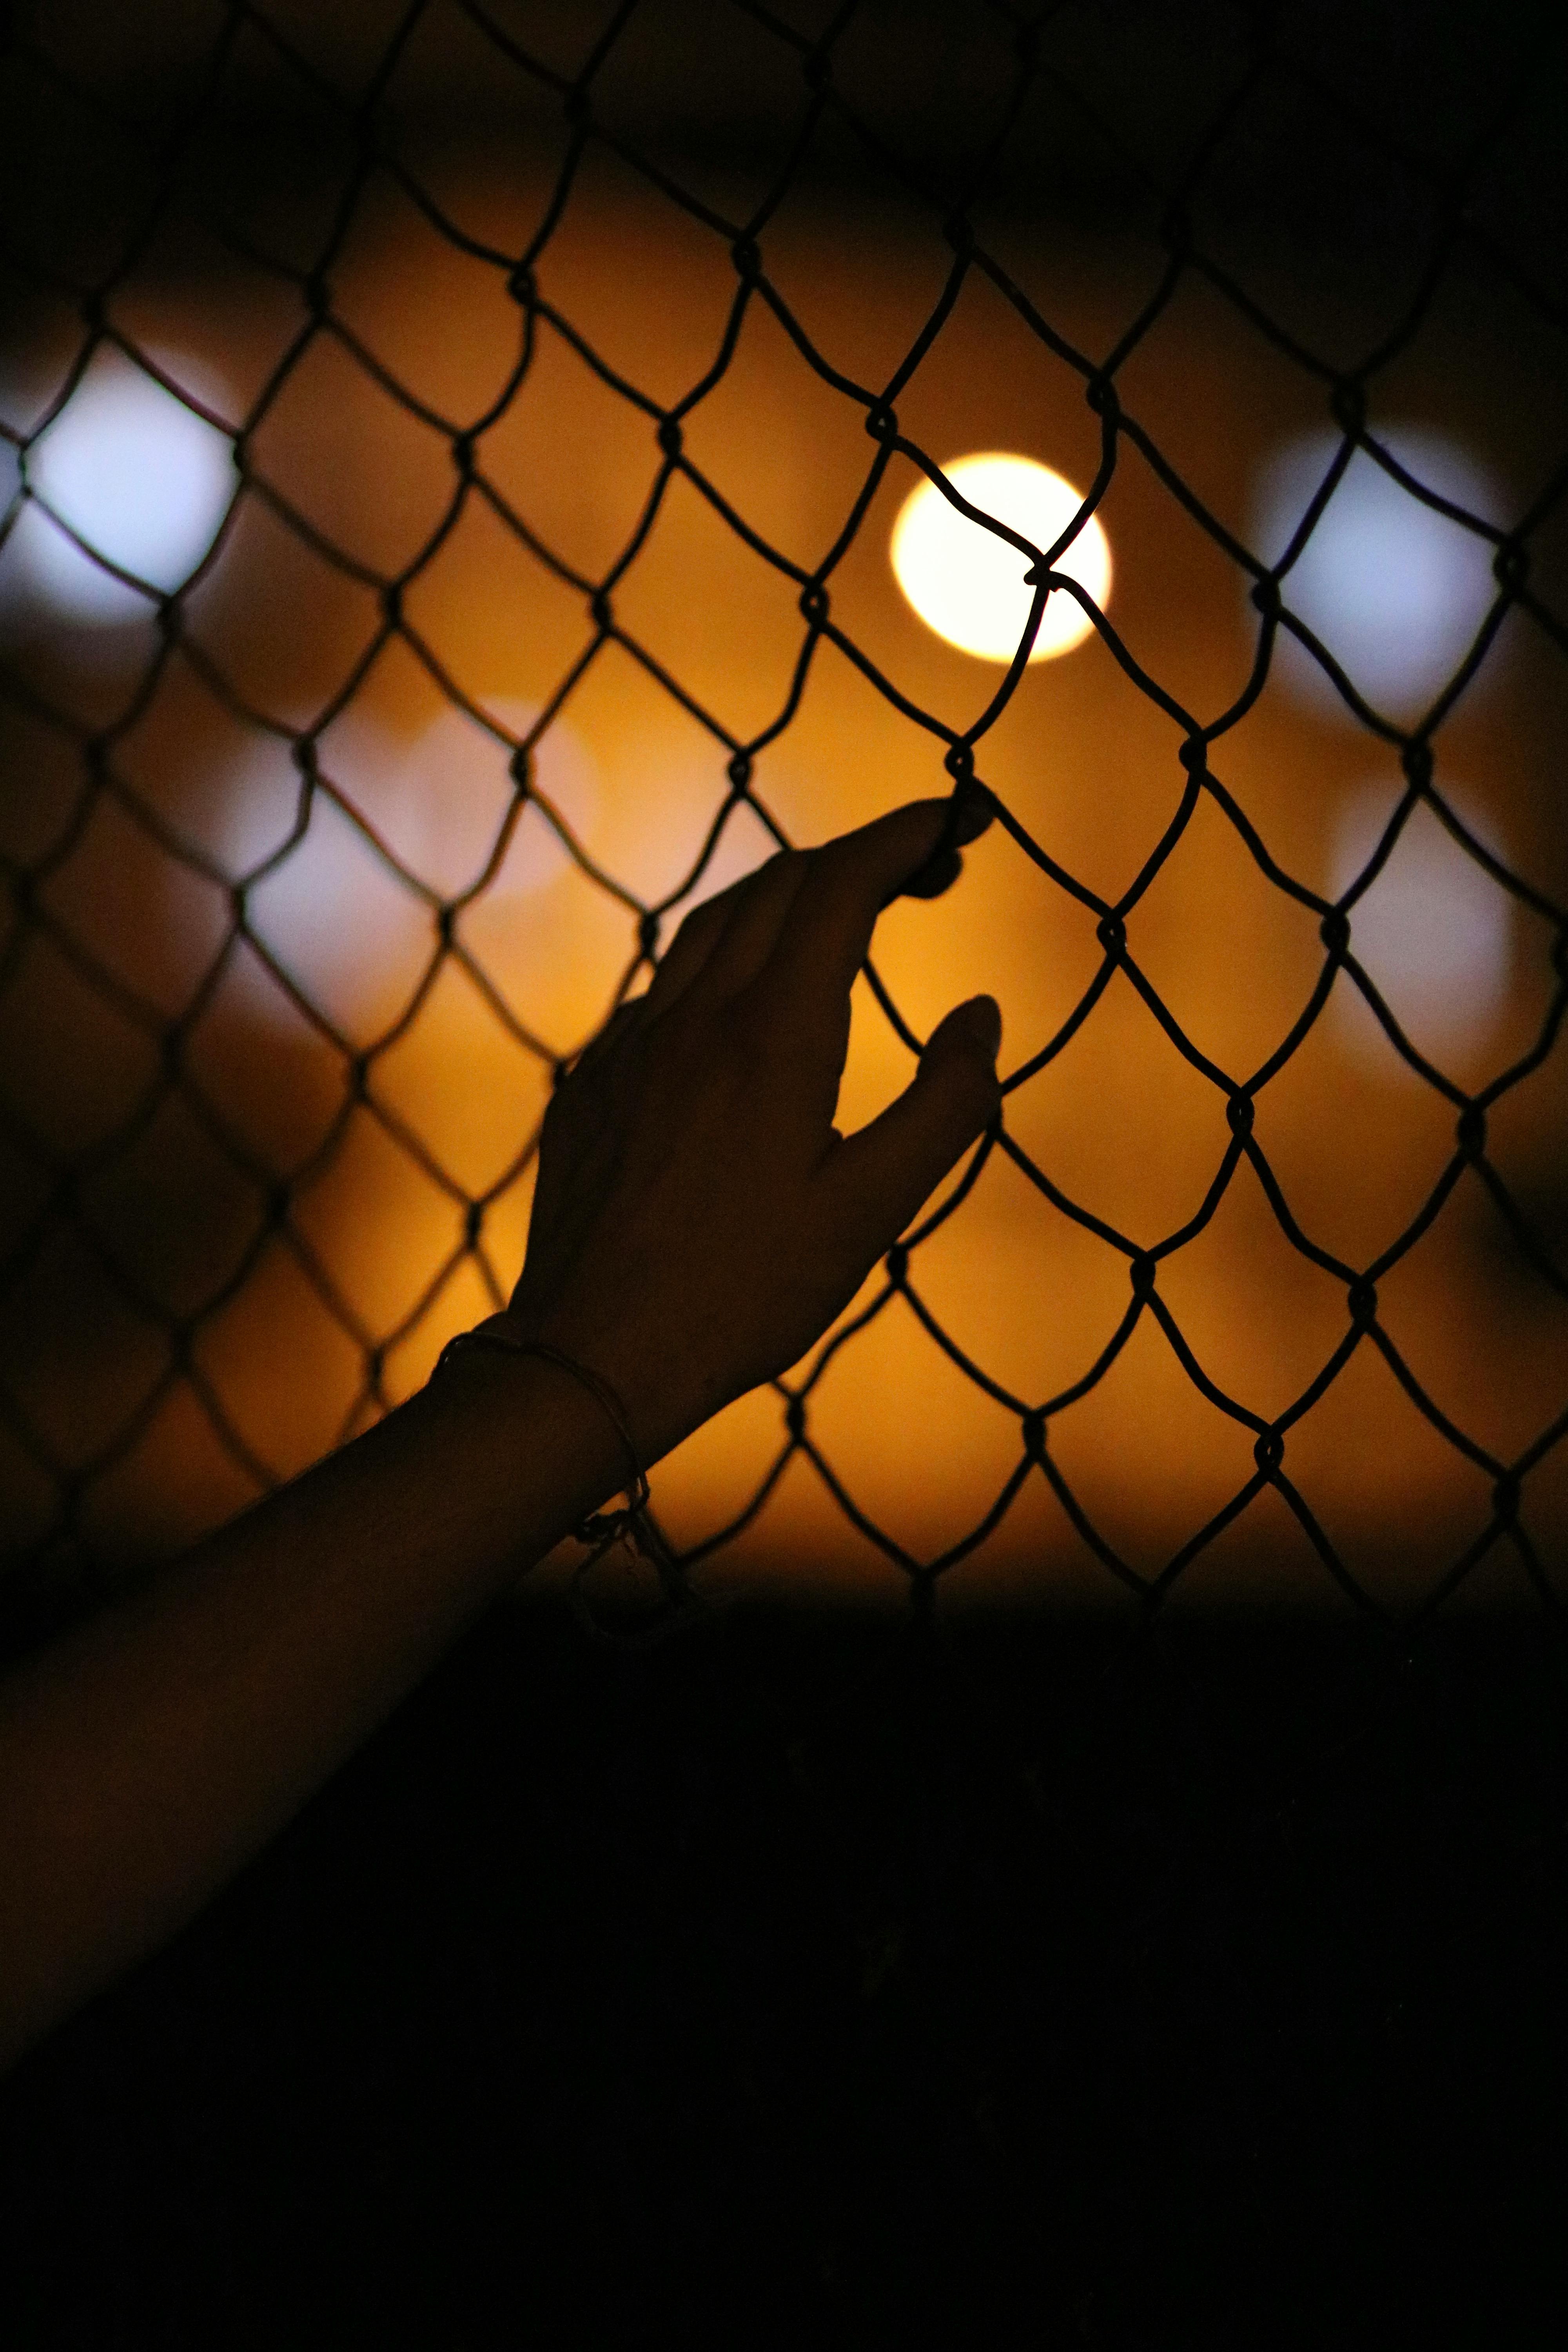 close up photo of hand on chain link fence